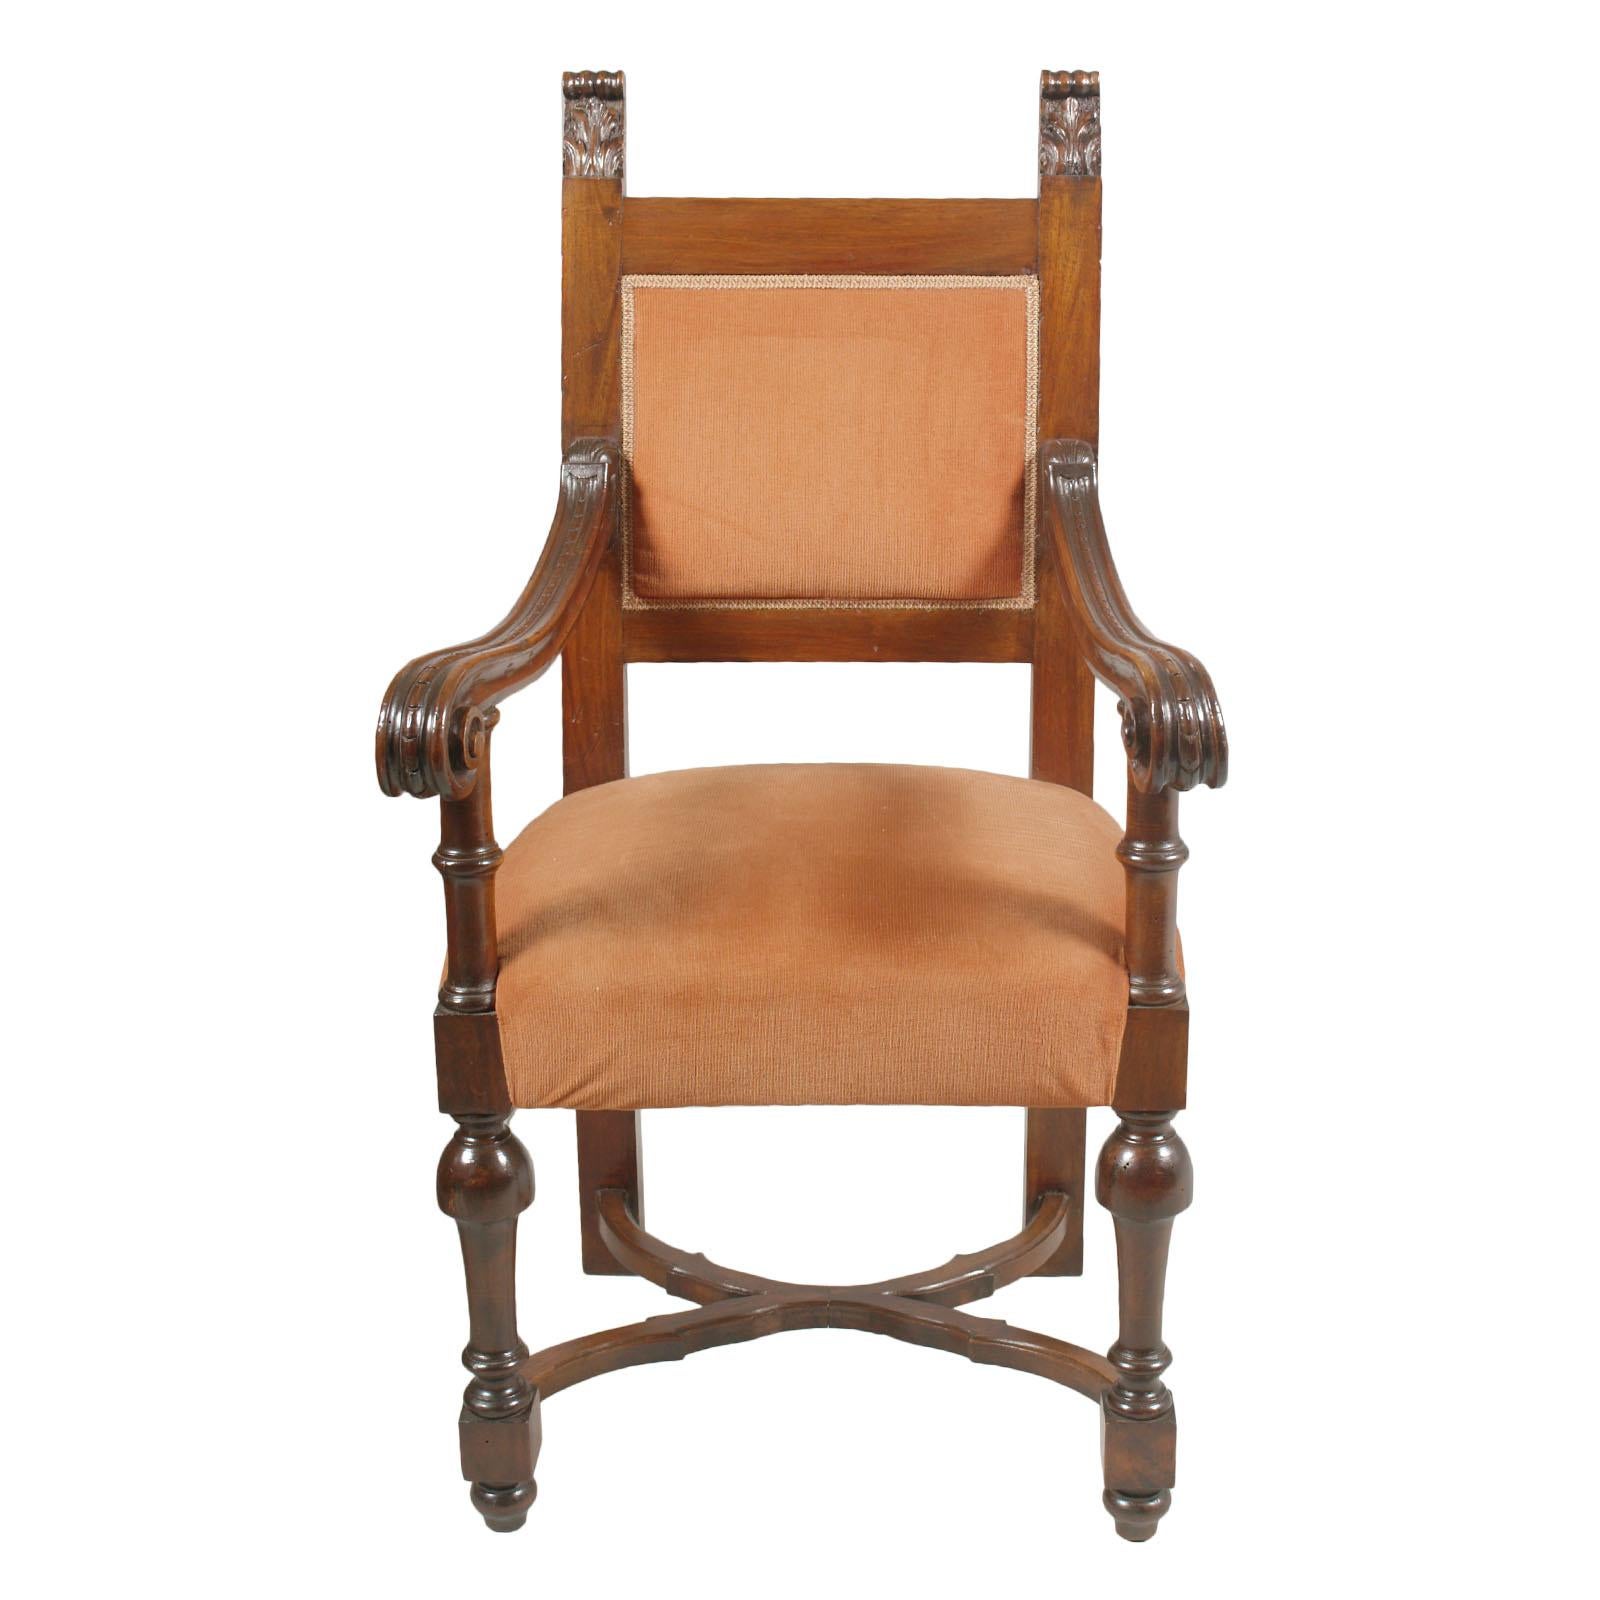 Hand-Carved Early 20th Century Carved Renaissance Tuscany Throne Armchair, Wax-Polished For Sale